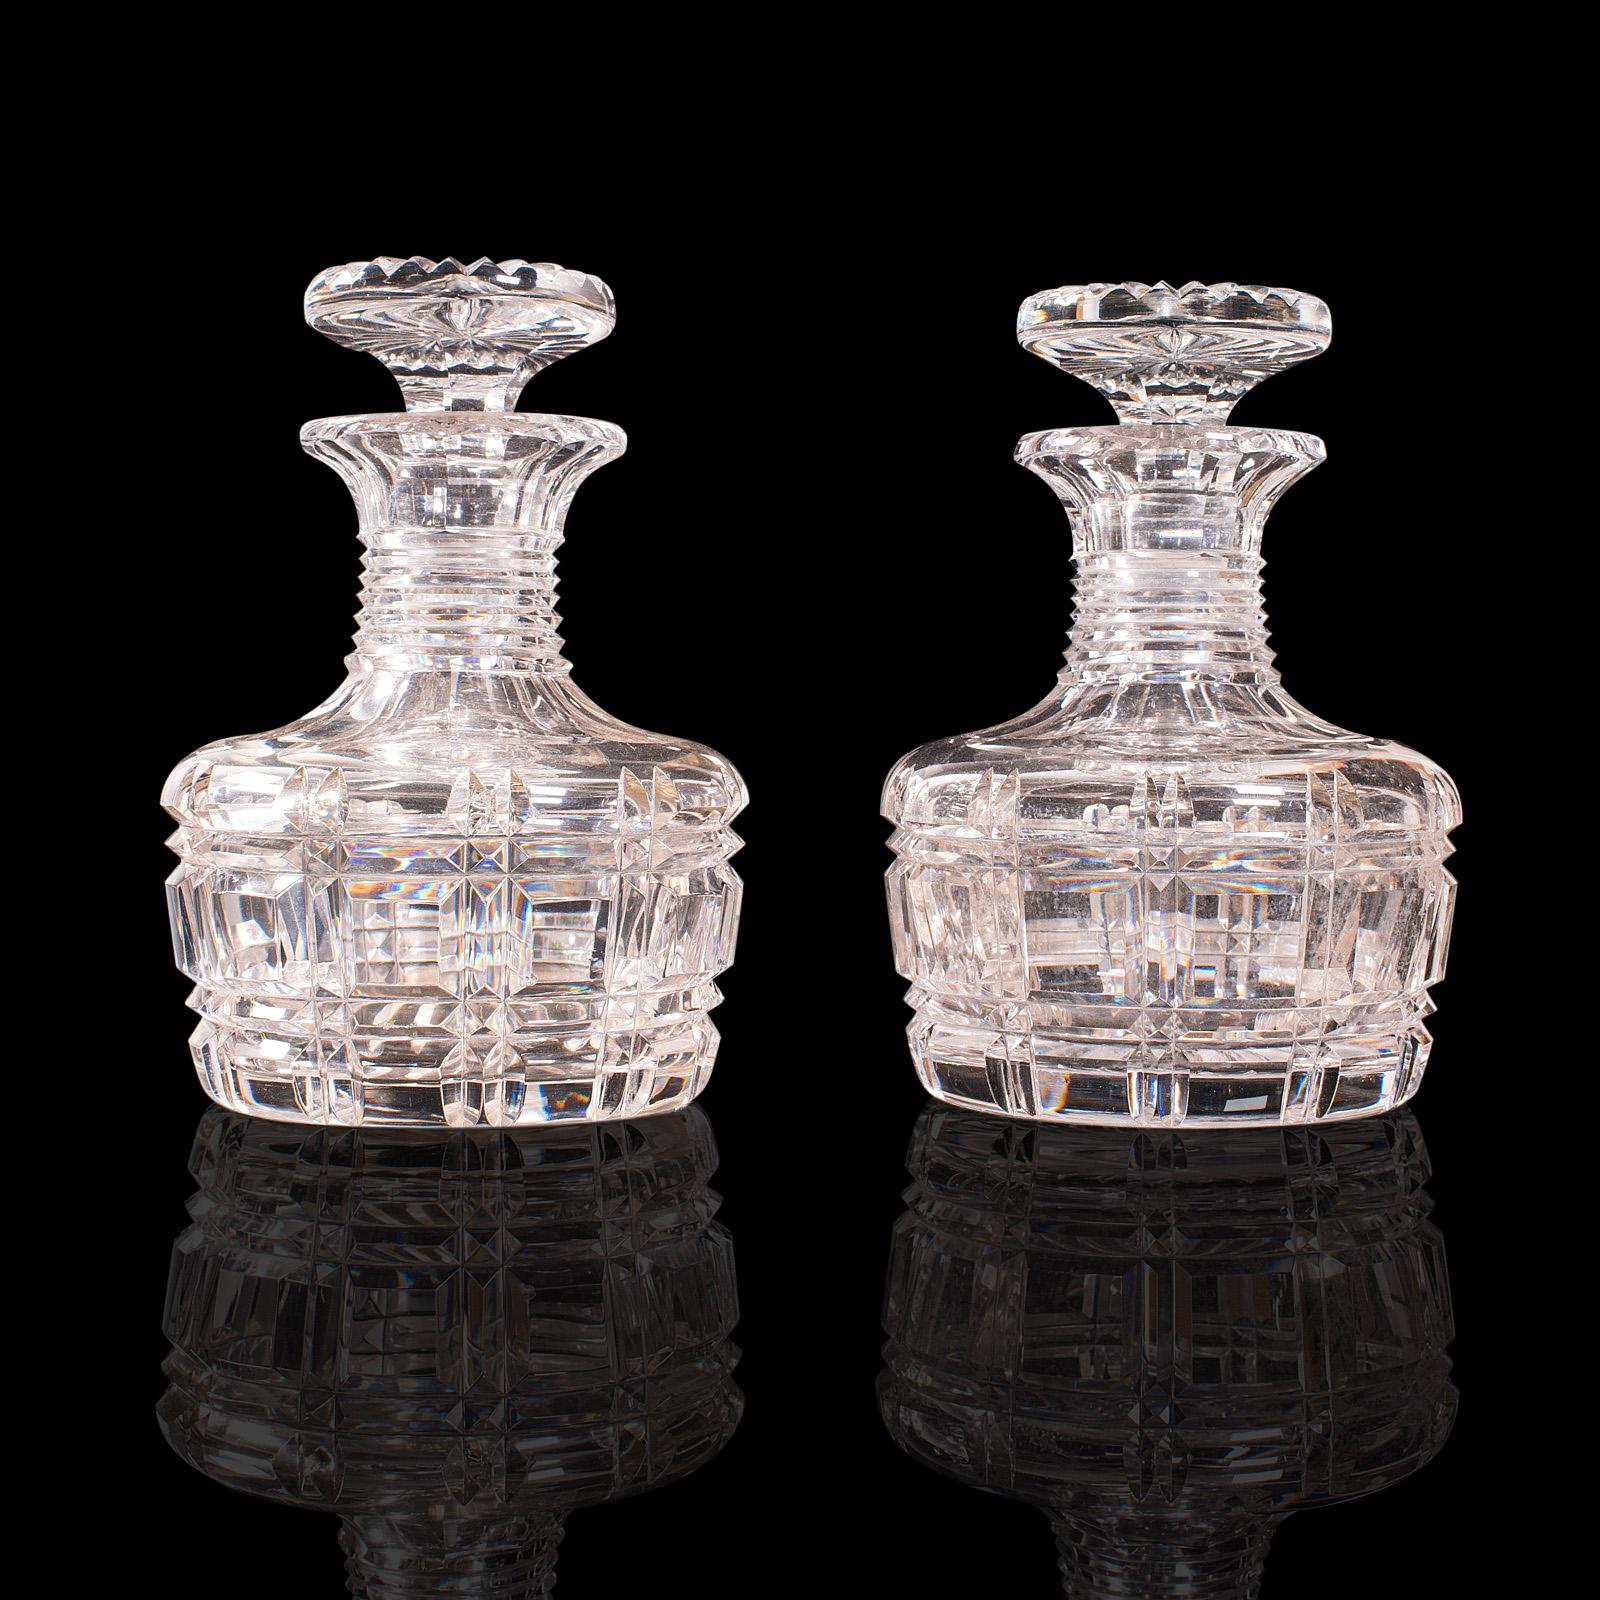 This is a pair of antique sherry decanters. An English, cut glass spirit or liquor flask, dating to the Edwardian period, circa 1910.

Beautifully cut decanters with an eye-catching finish
Displaying a desirable aged patina and in good